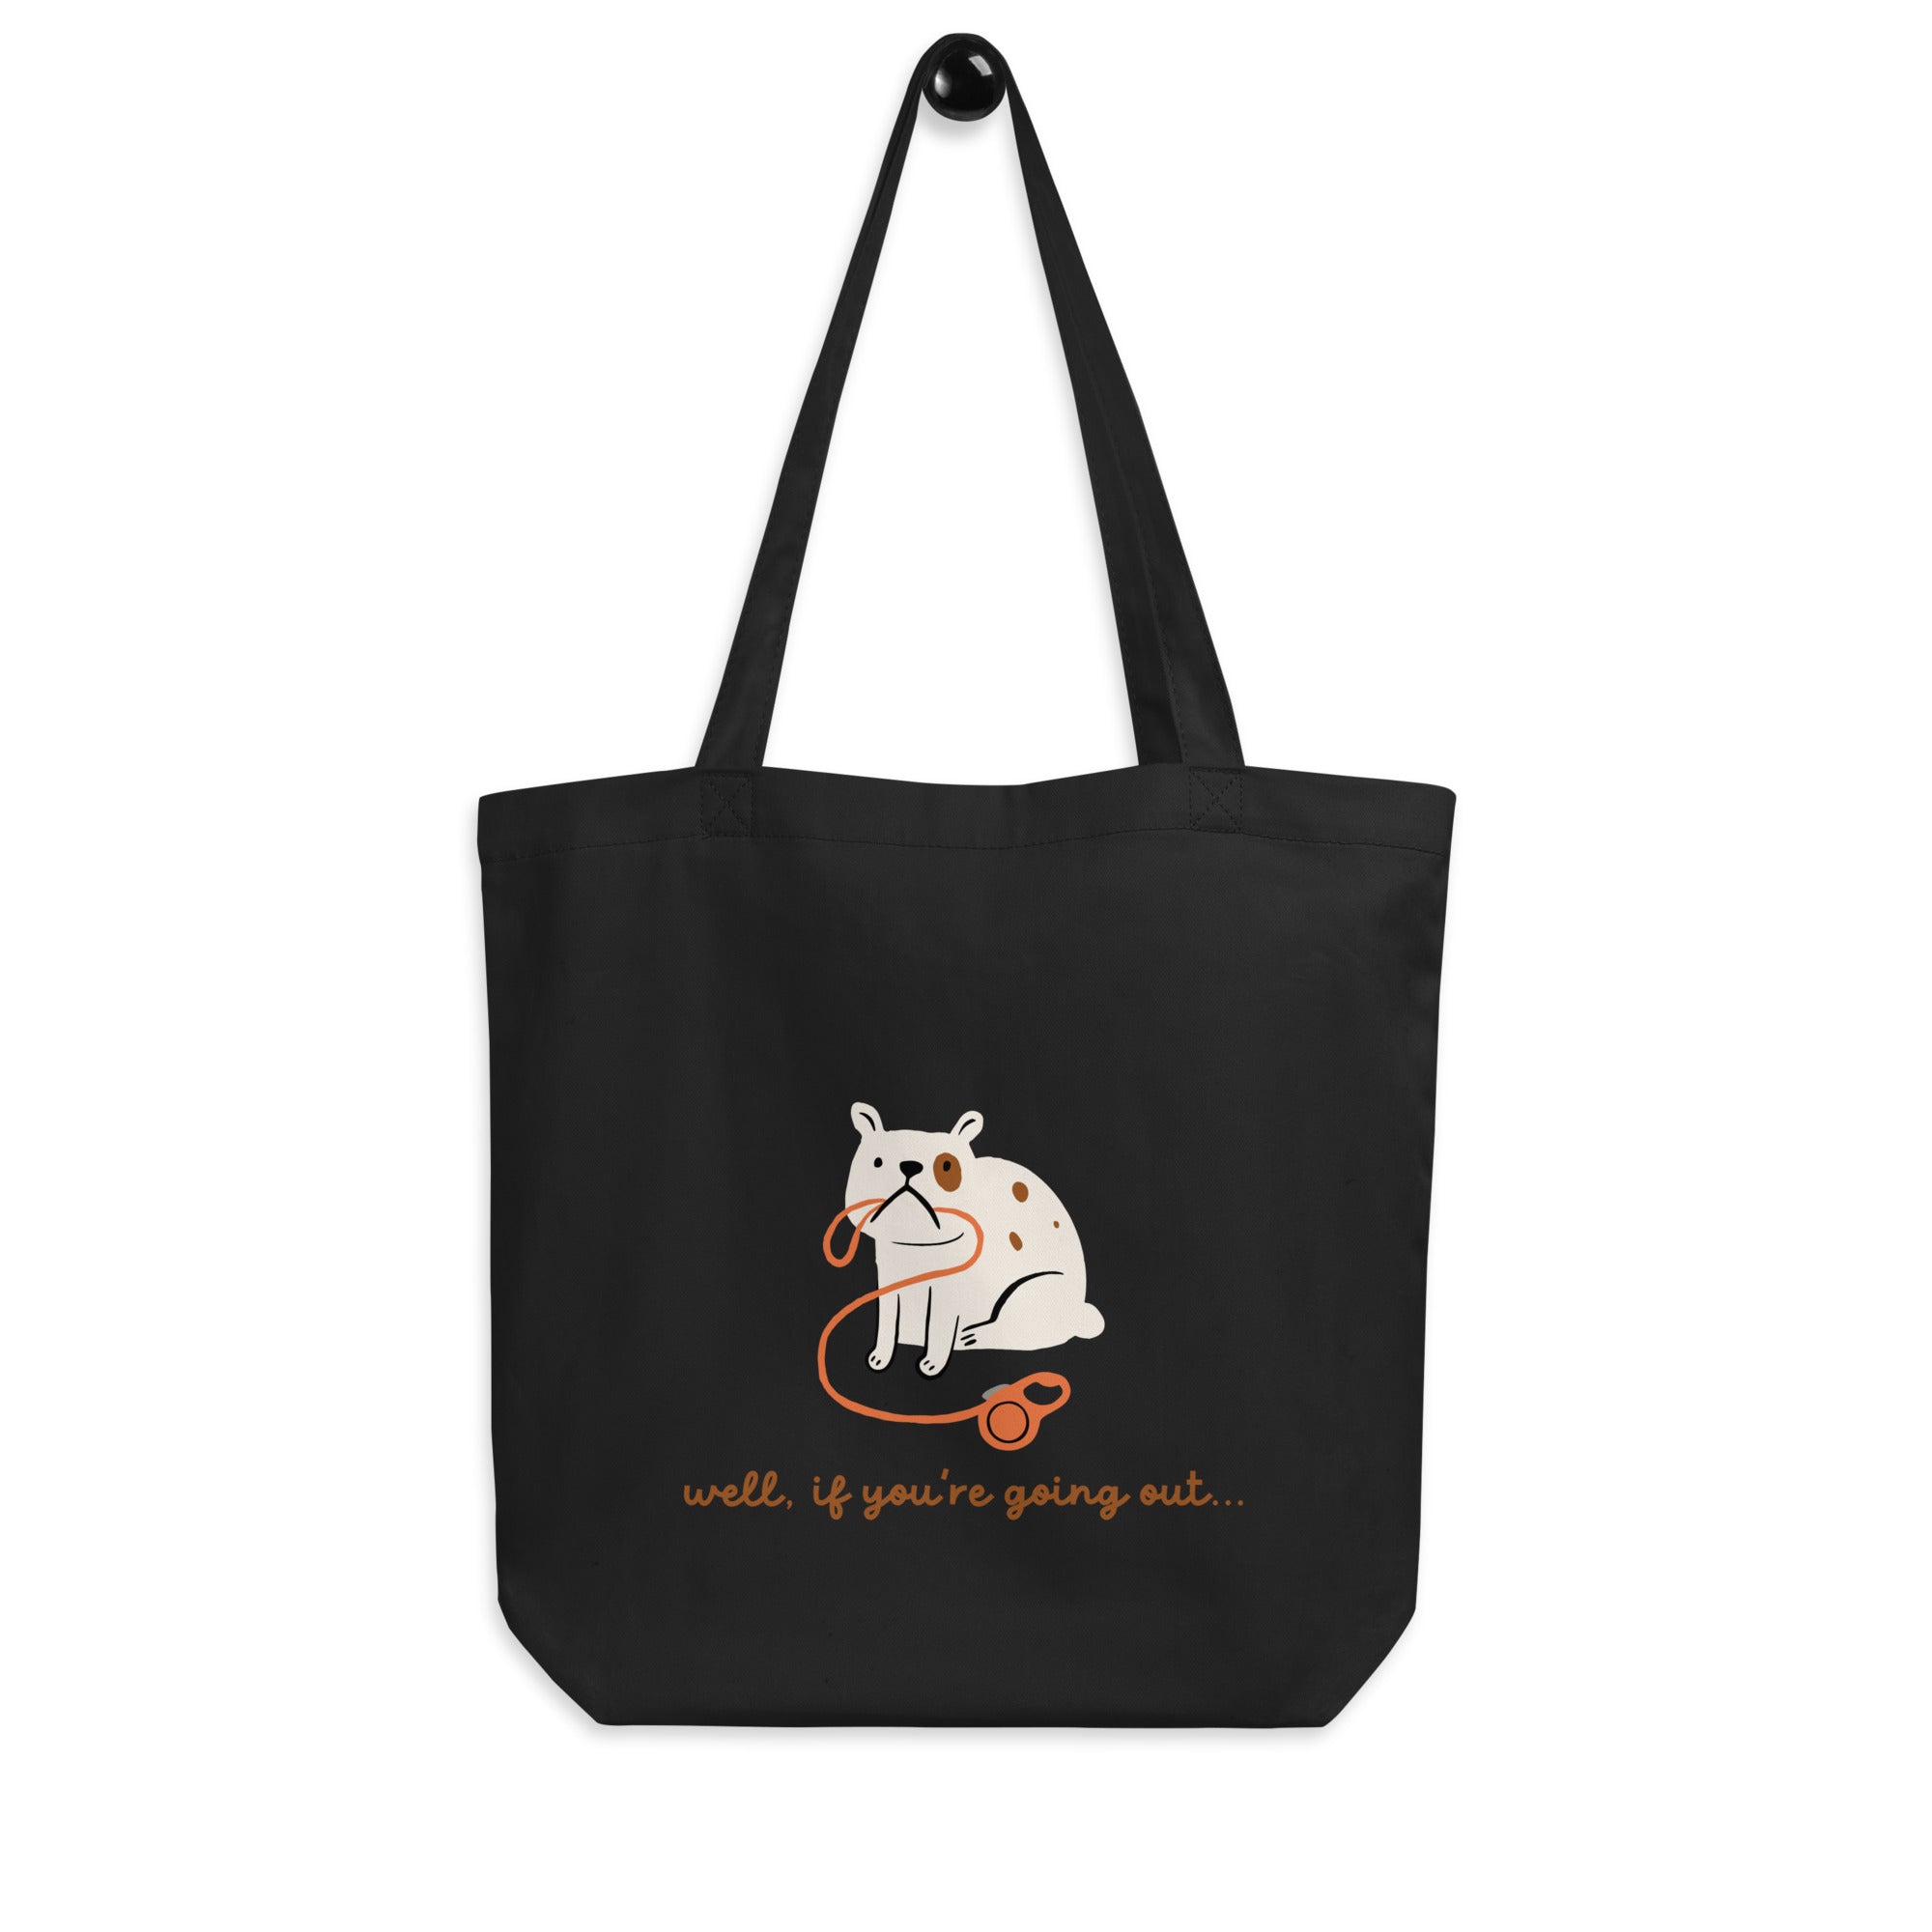 Going Out design Eco Tote Bag